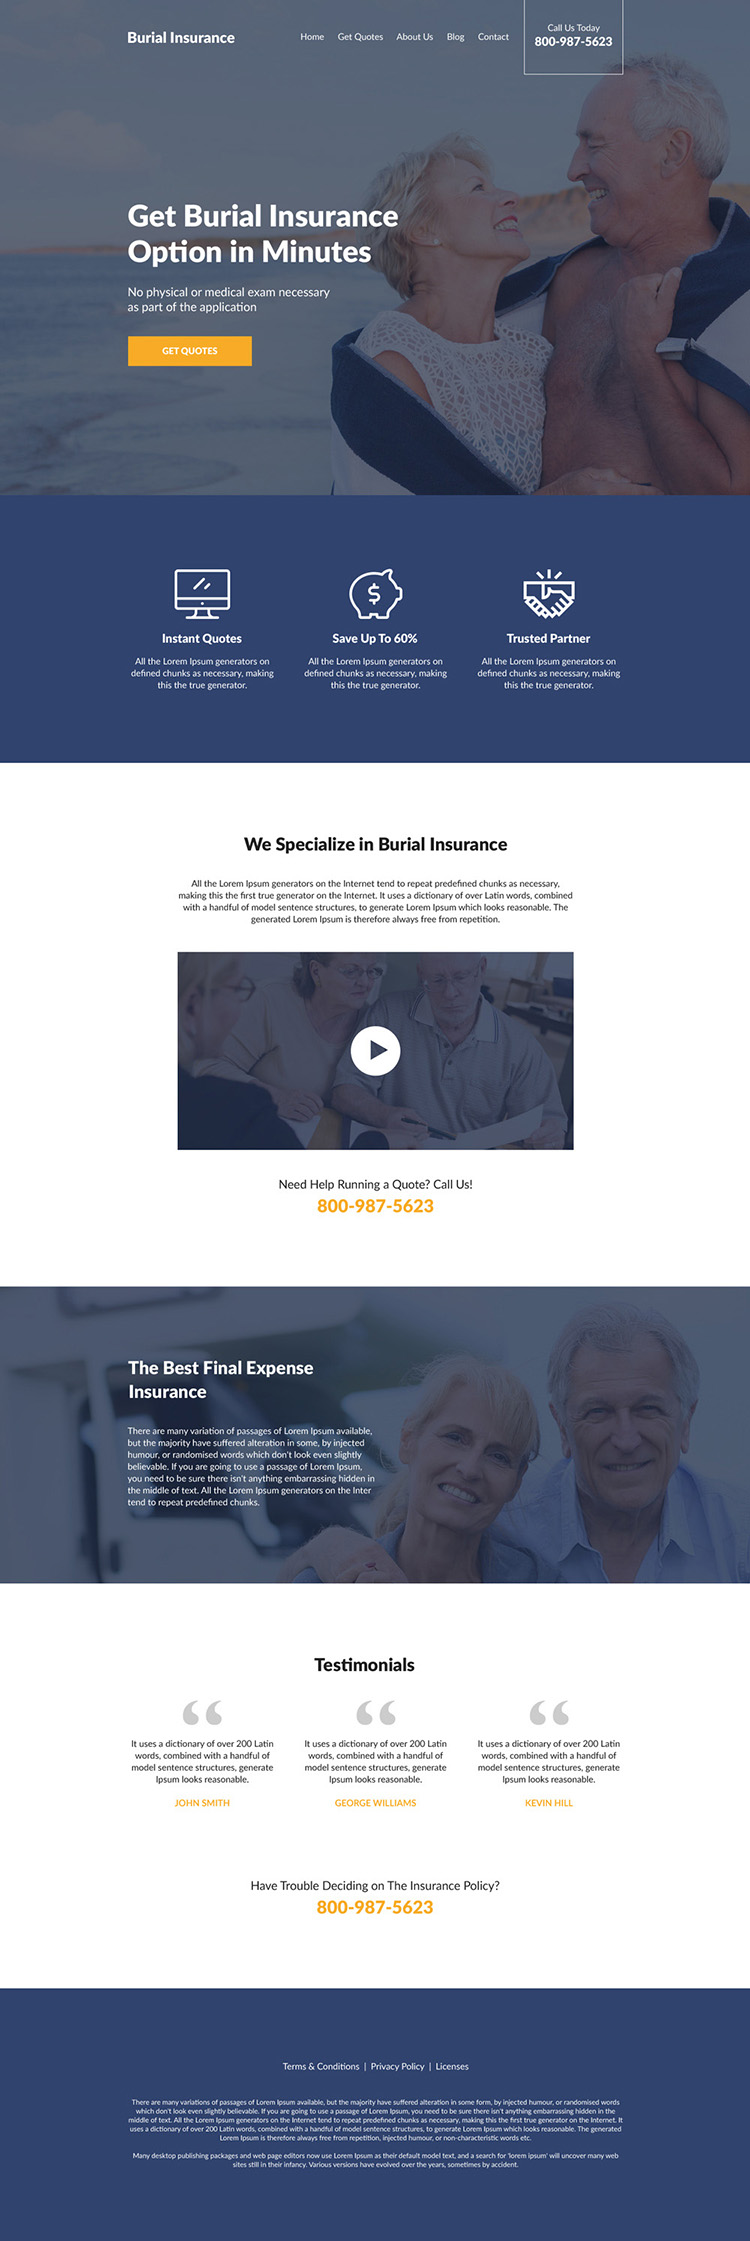 professional burial insurance free quotes responsive website design